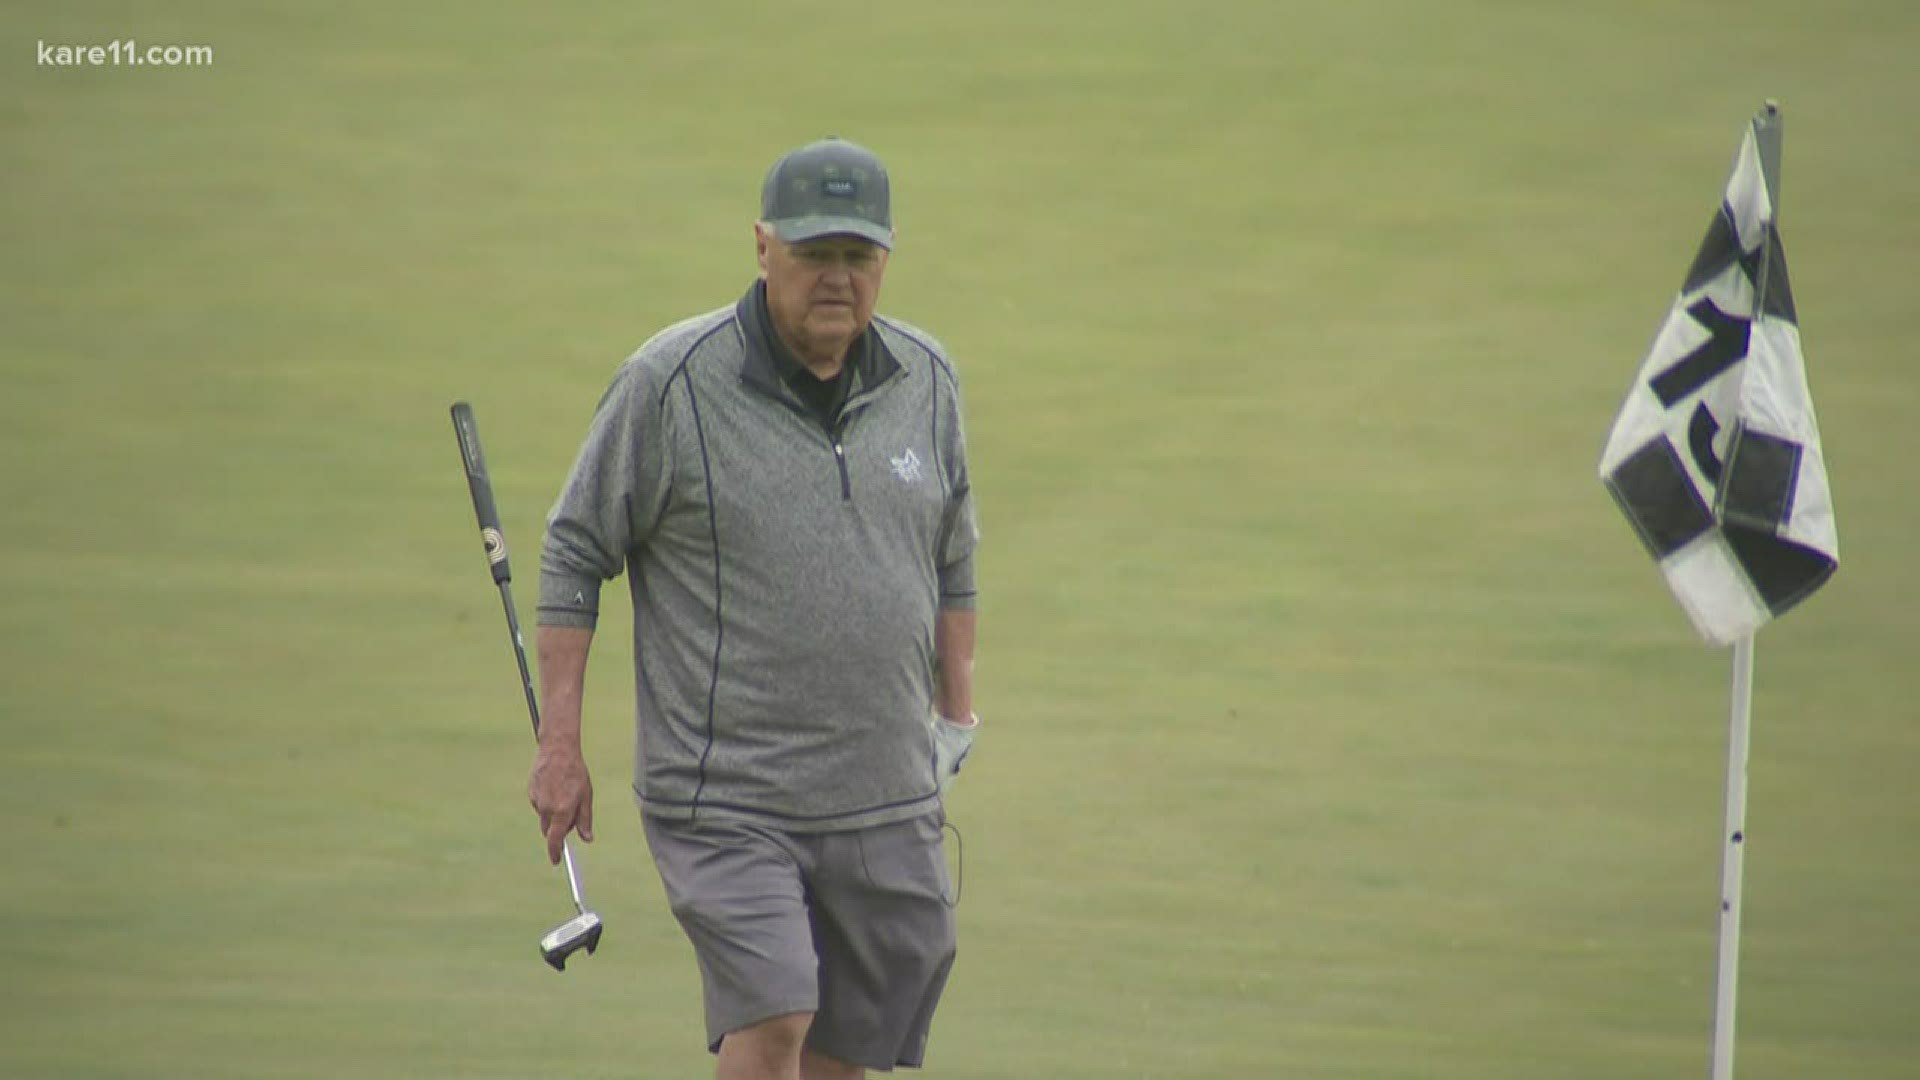 The Lake Elmo resident carded his fifth hole-in-one last week.